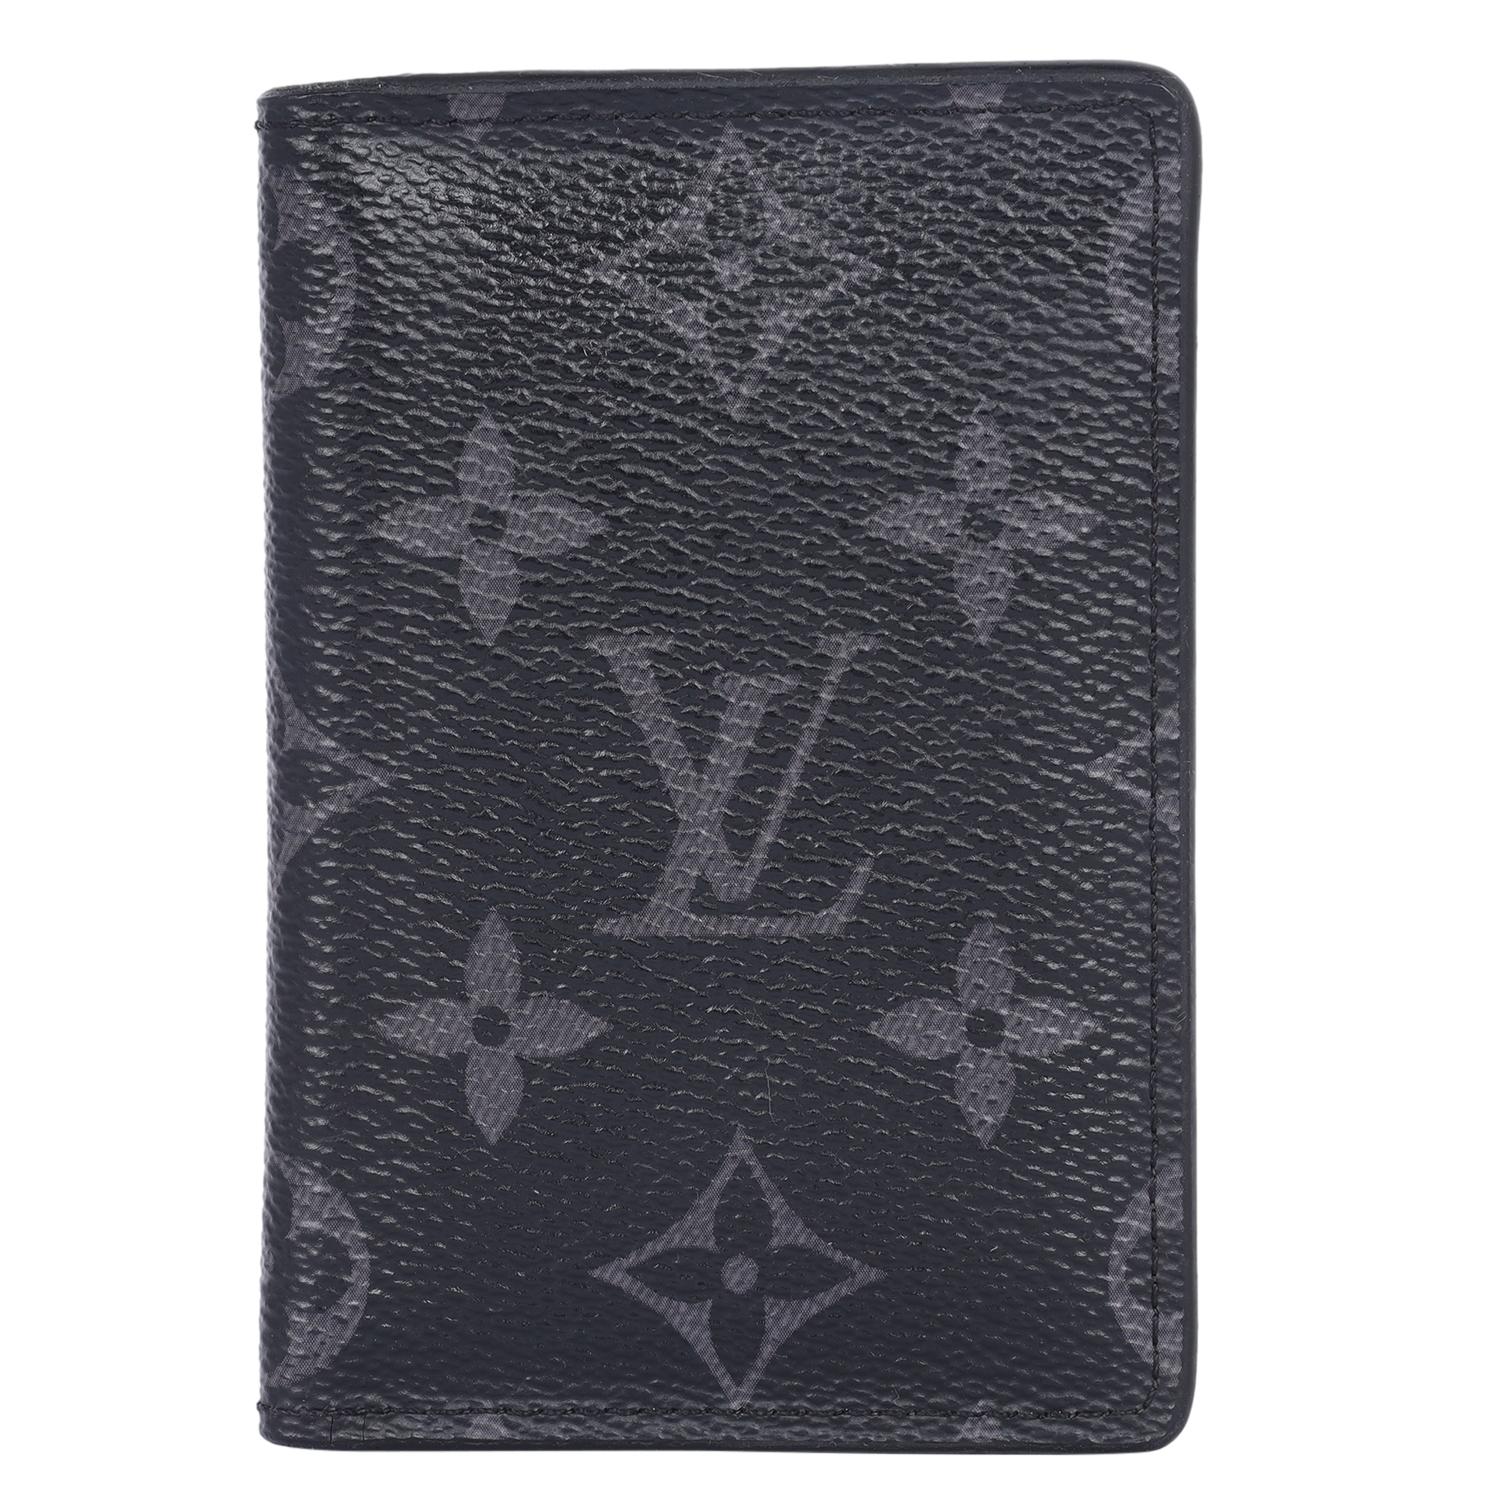 Authentic, pre owned Louis Vuitton black monogram eclipse pocket organizer wallet. Features Louis Vuitton monogram canvas in back and grey. The front flap opens to a black cross grain leather interior that has 3 patch pockets and 4 credit card